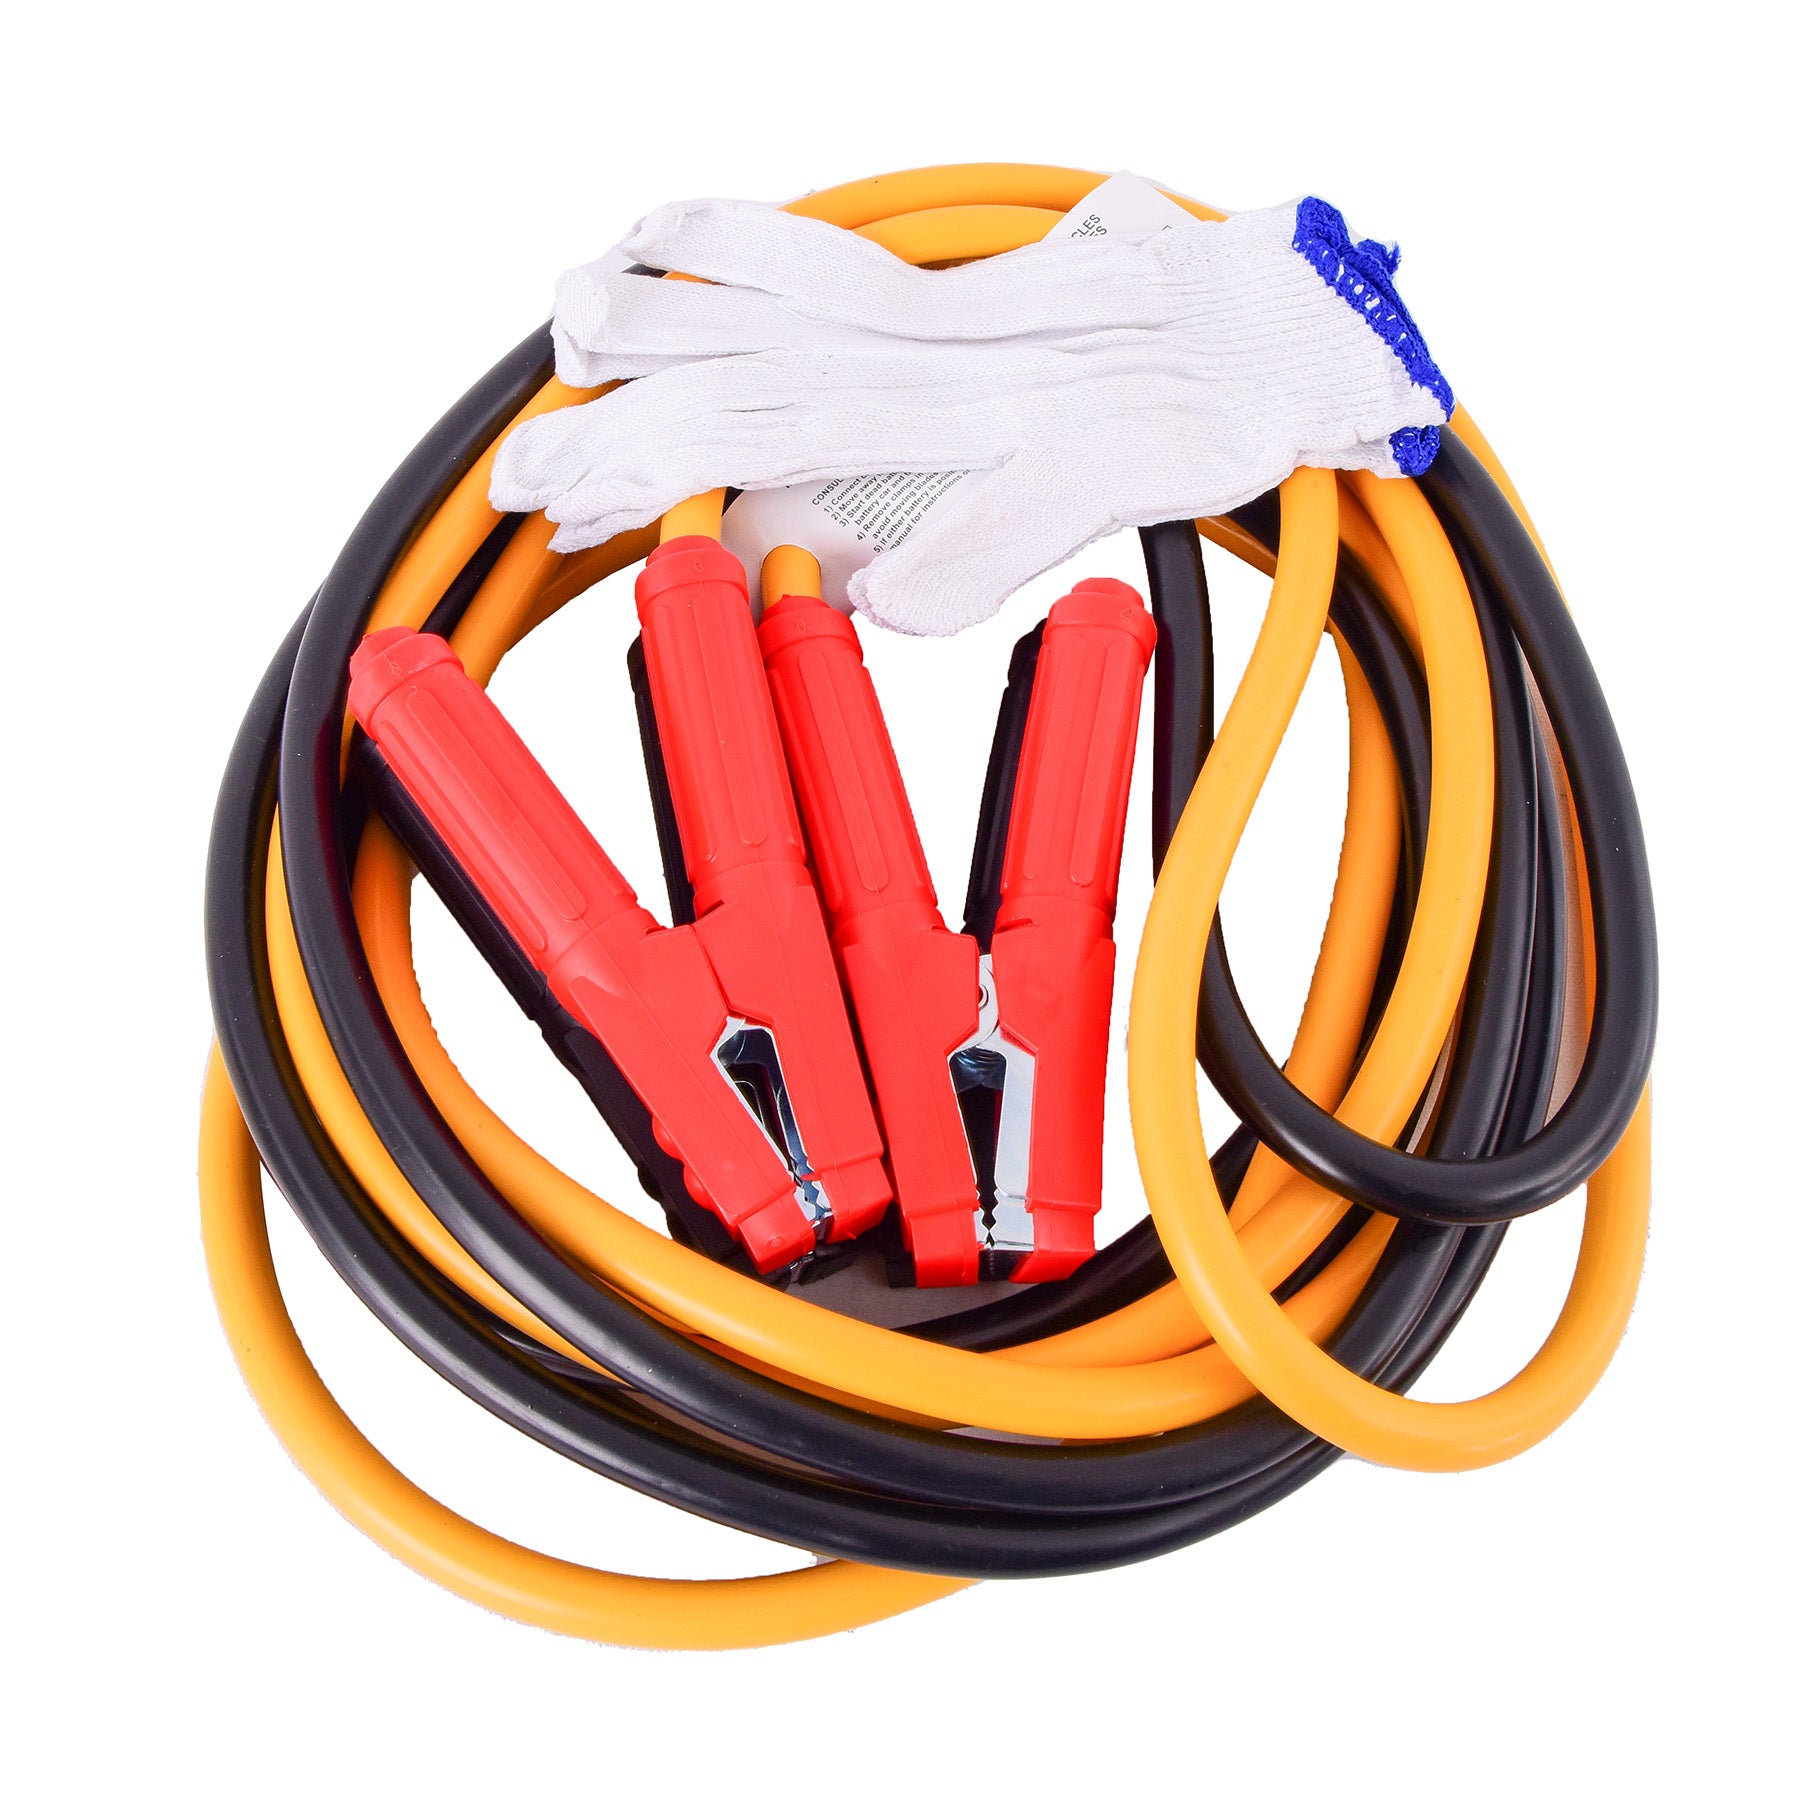 Car booster cable, 1000 wattLength: 5 m